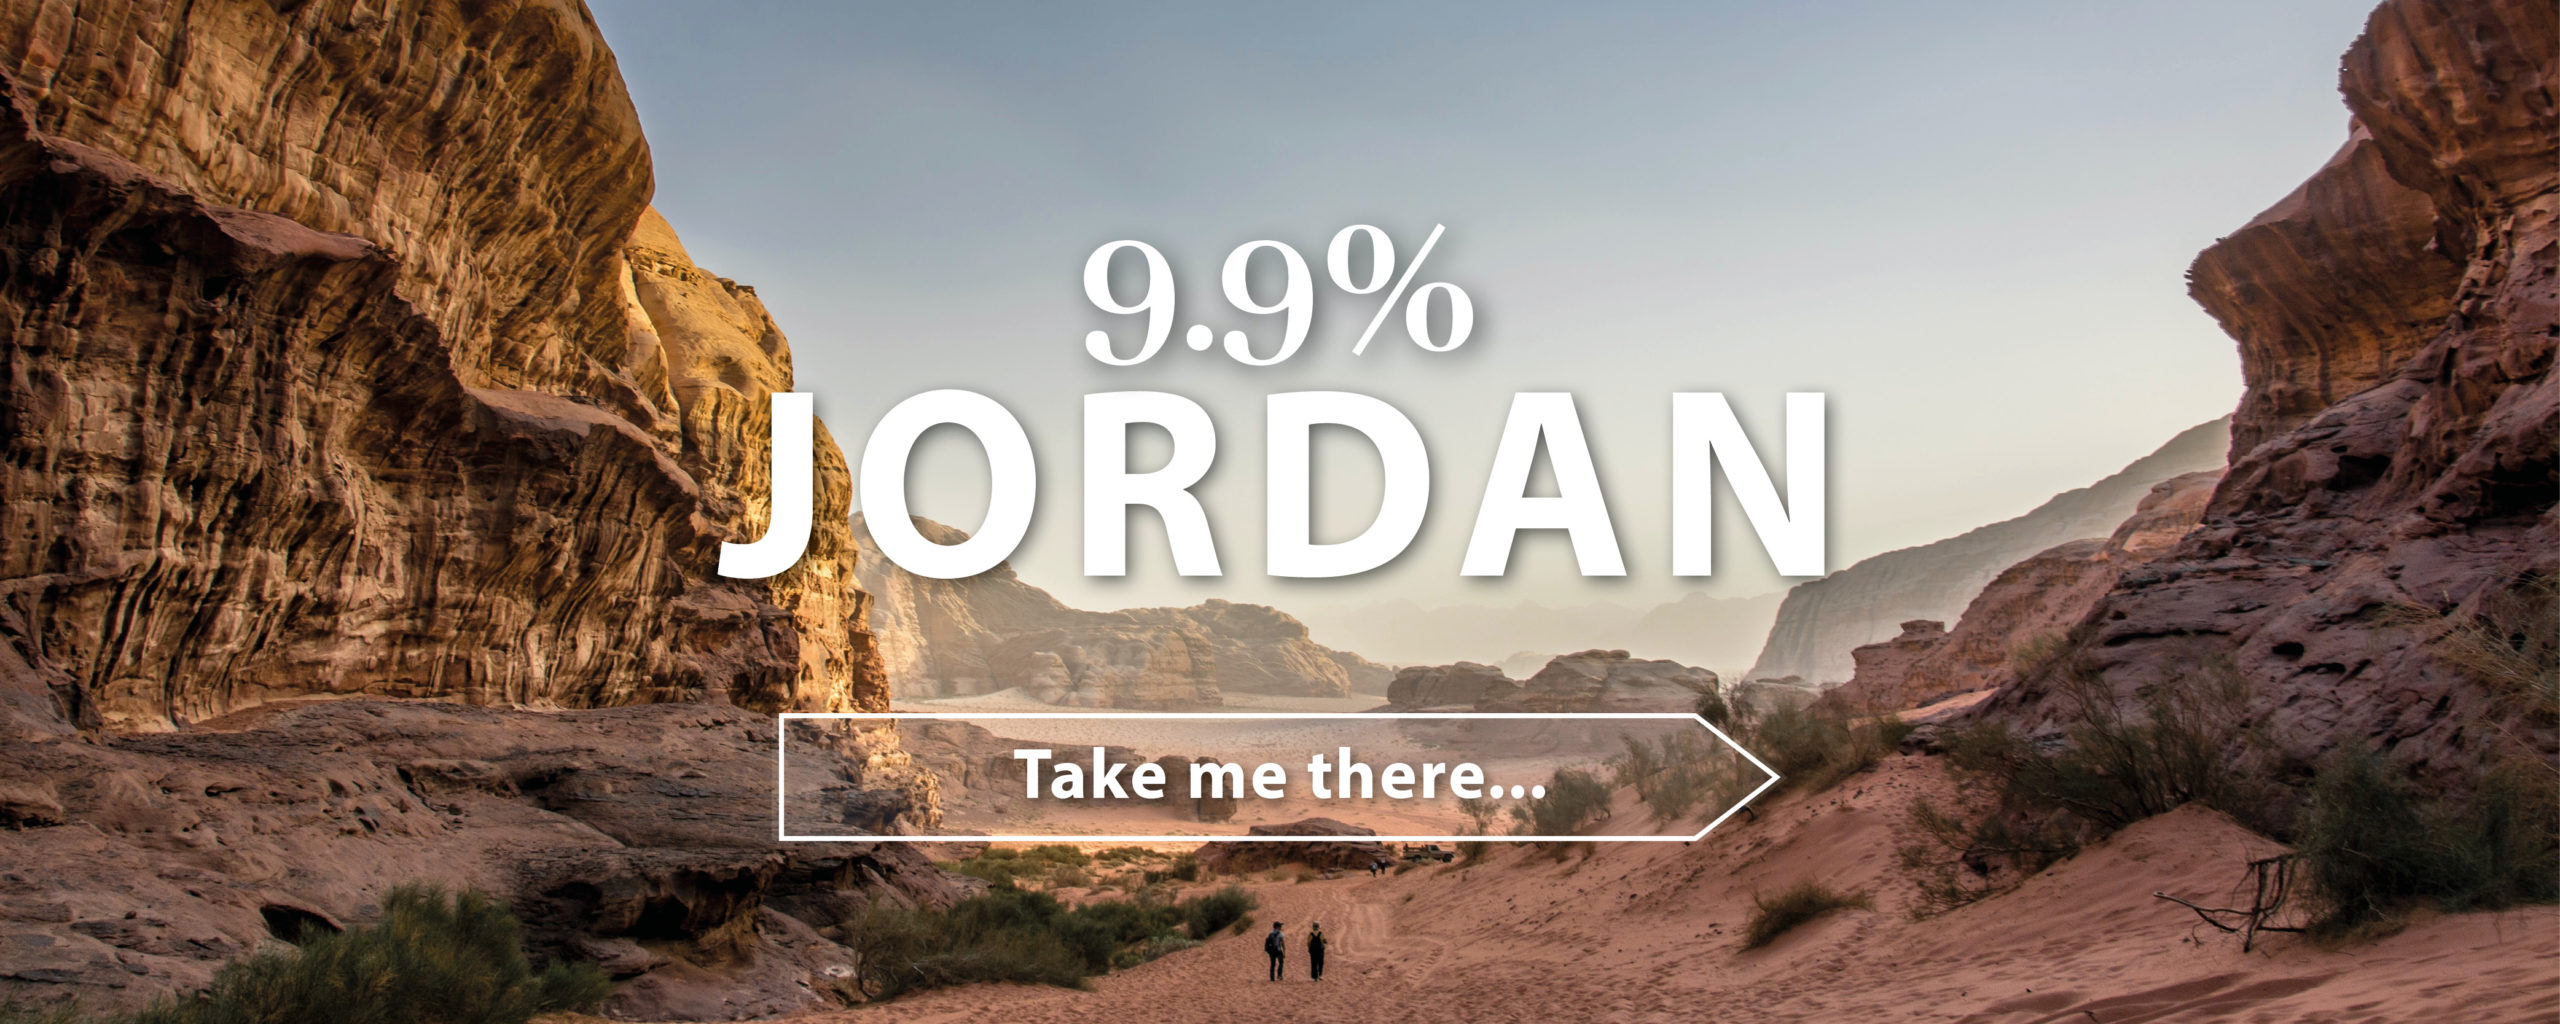 Where youre going this year_Jordan